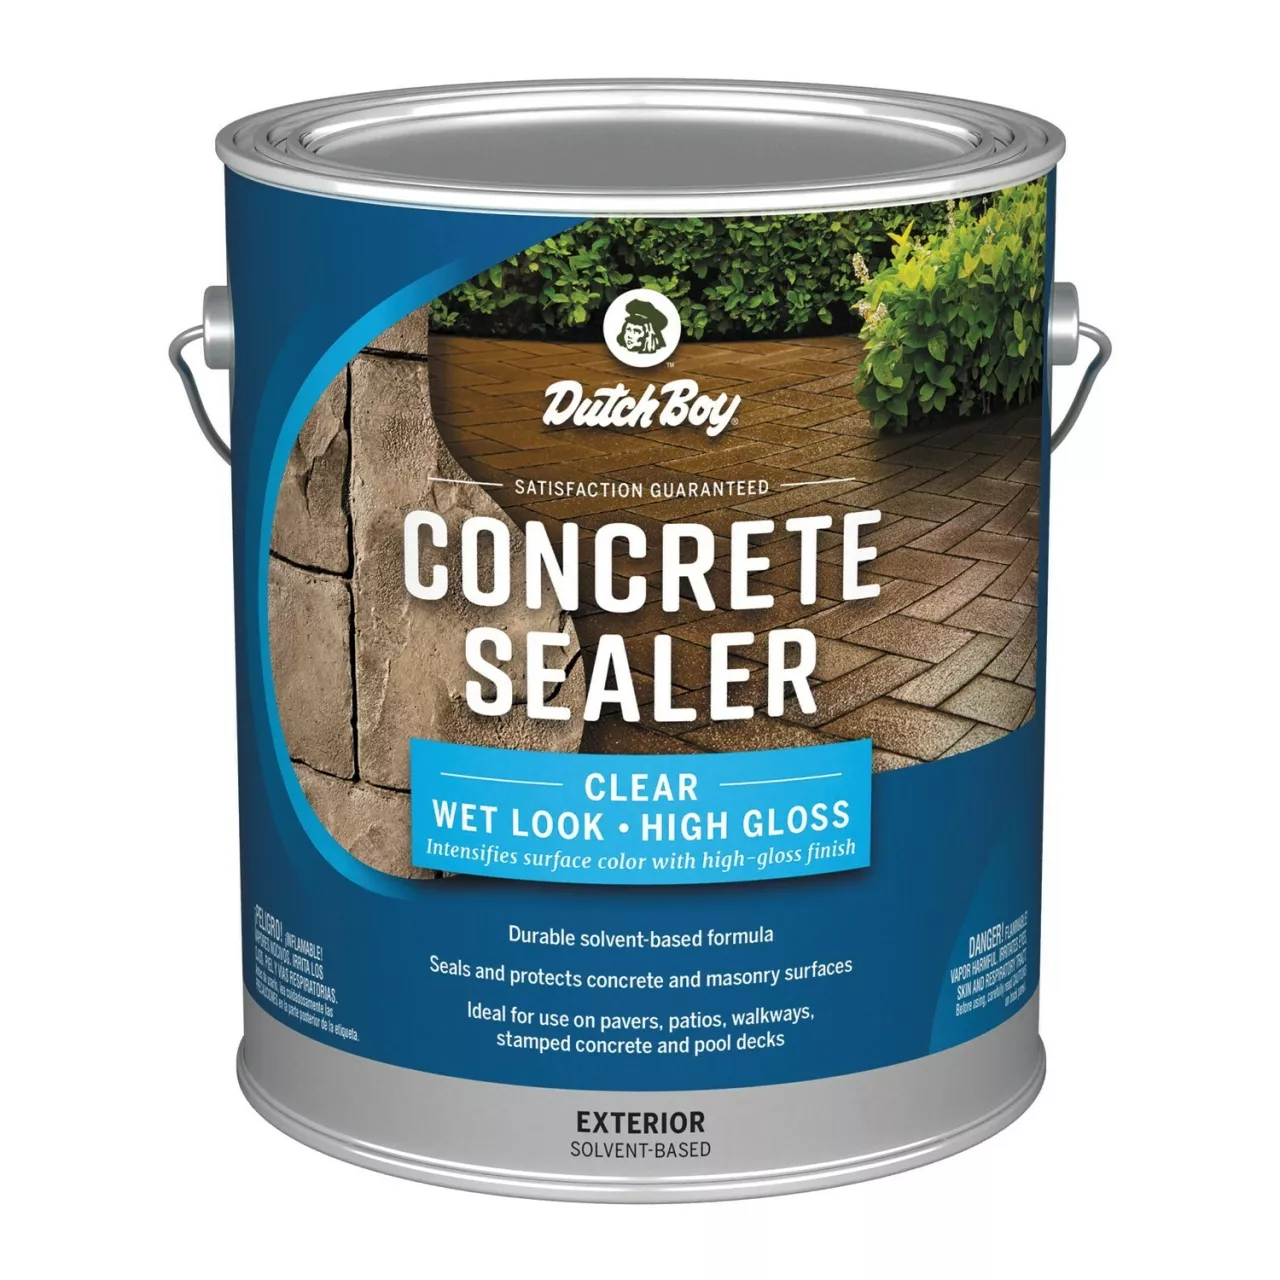 Concrete and Masonry Floor Coatings from Dutch Boy® Paints is available in three easy-to-apply products that protect and enhance basement floors and exterior concrete pavers, patios, walkways and more. img#1